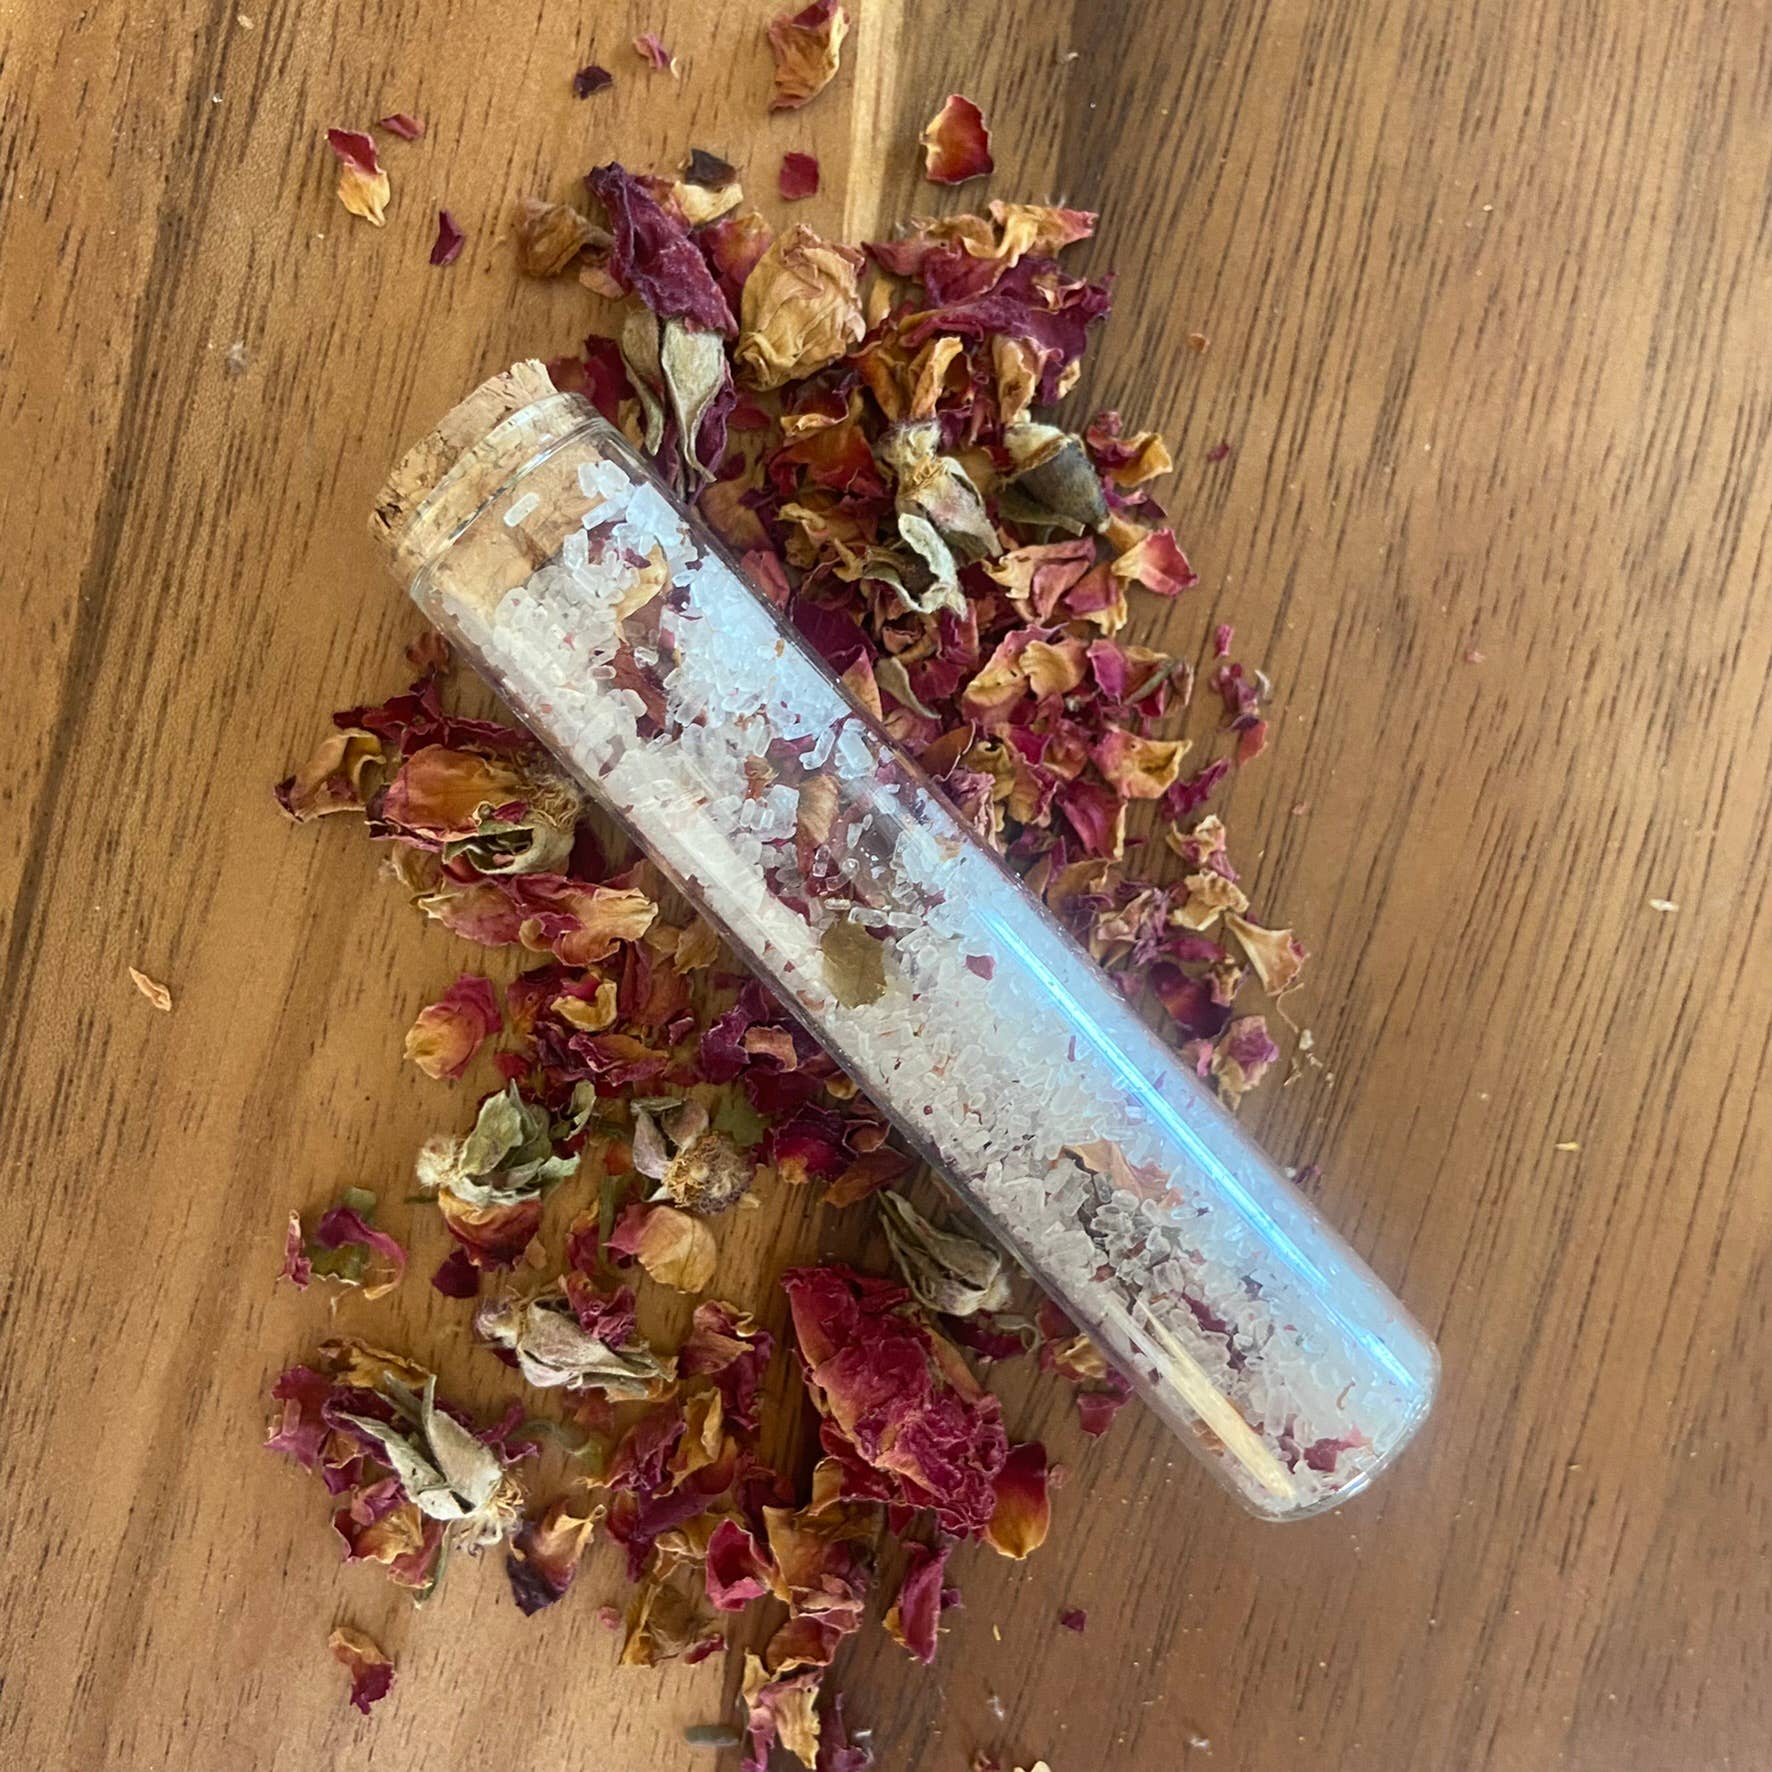 Herbal Bath Salts Test Tubes | Made With Dried Flowers